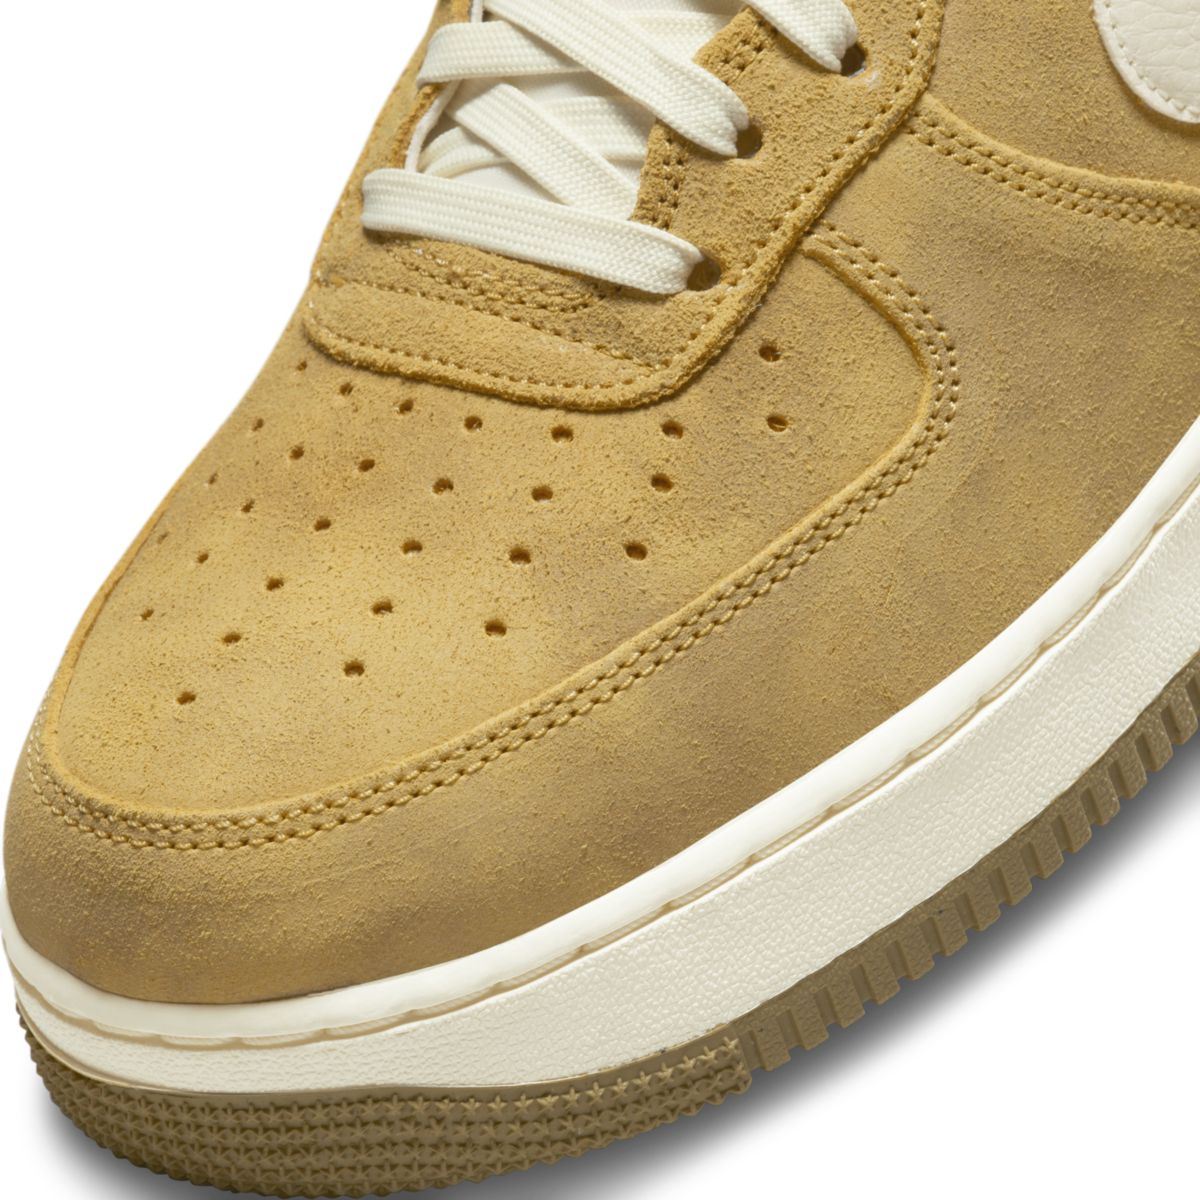 Nike Air Force 1 Low Gold Sail Suede DV6474-700 7